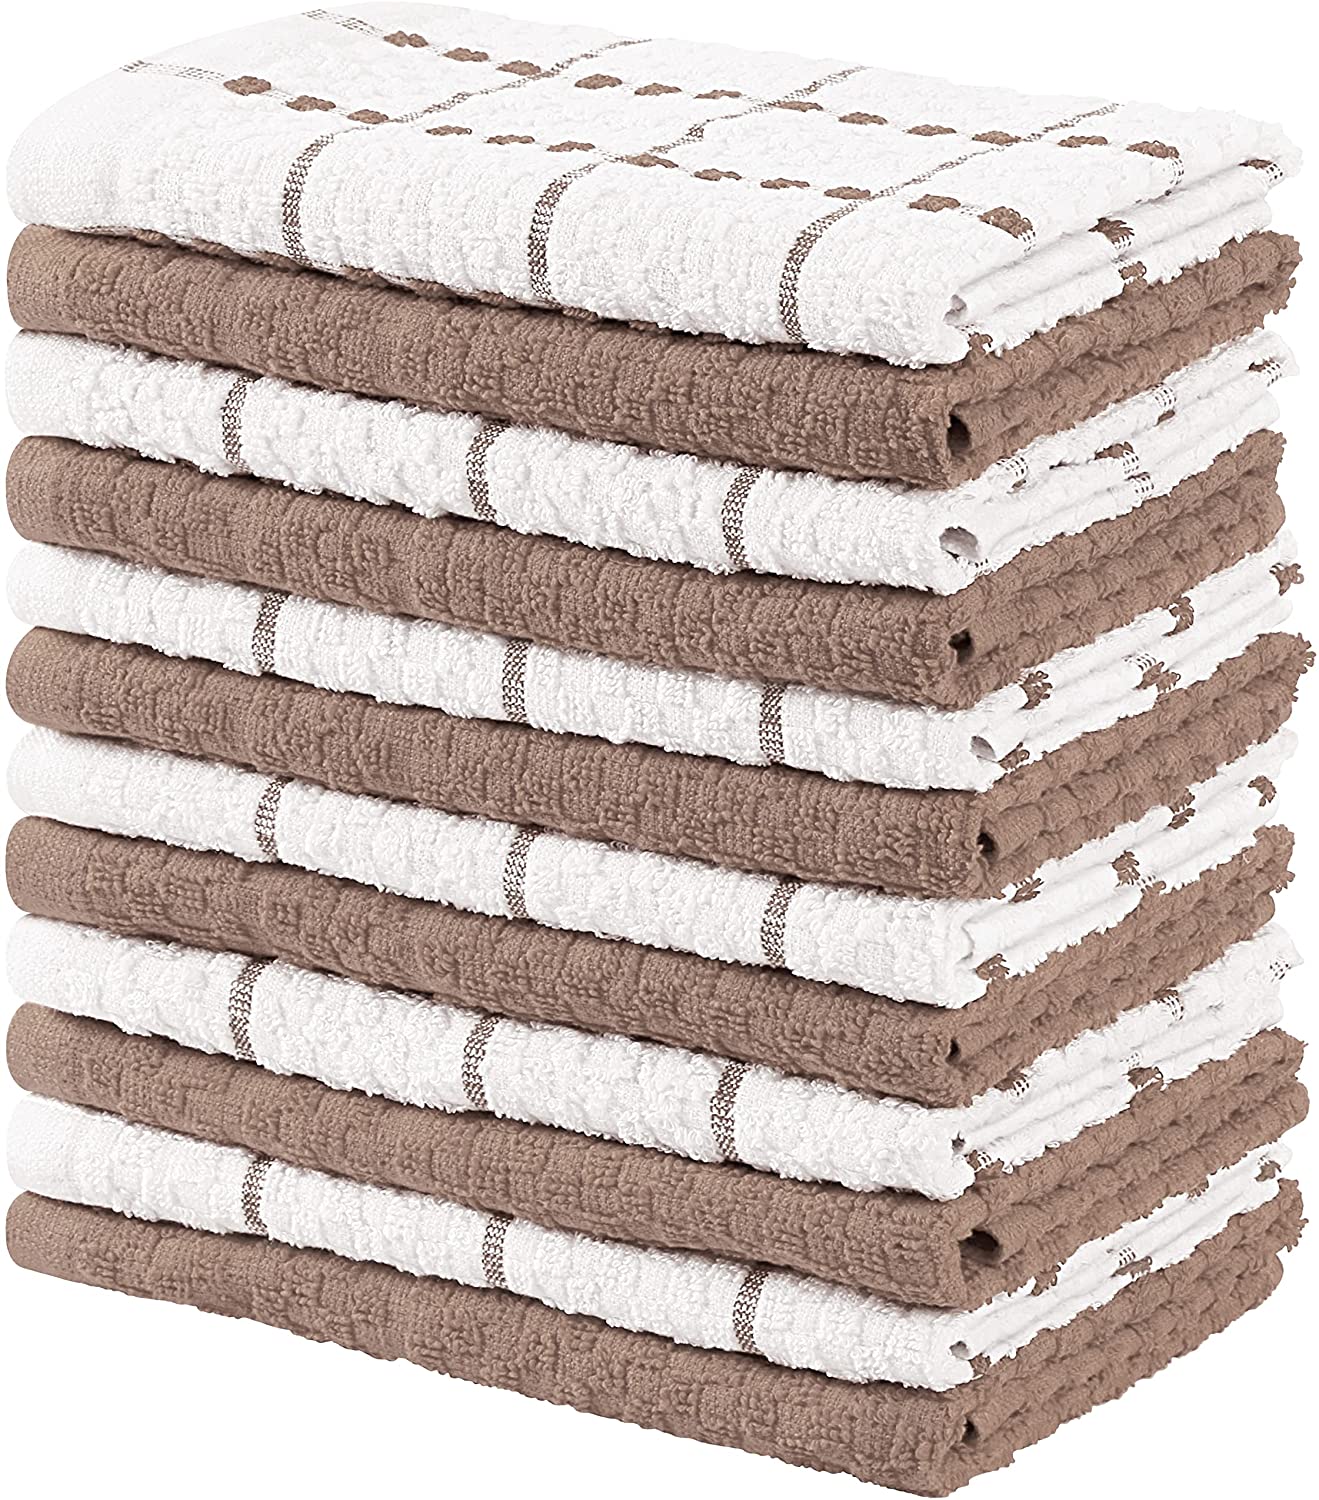 Utopia Towels Kitchen Towels, Pack of 12, 15 x 25 Inches, 100